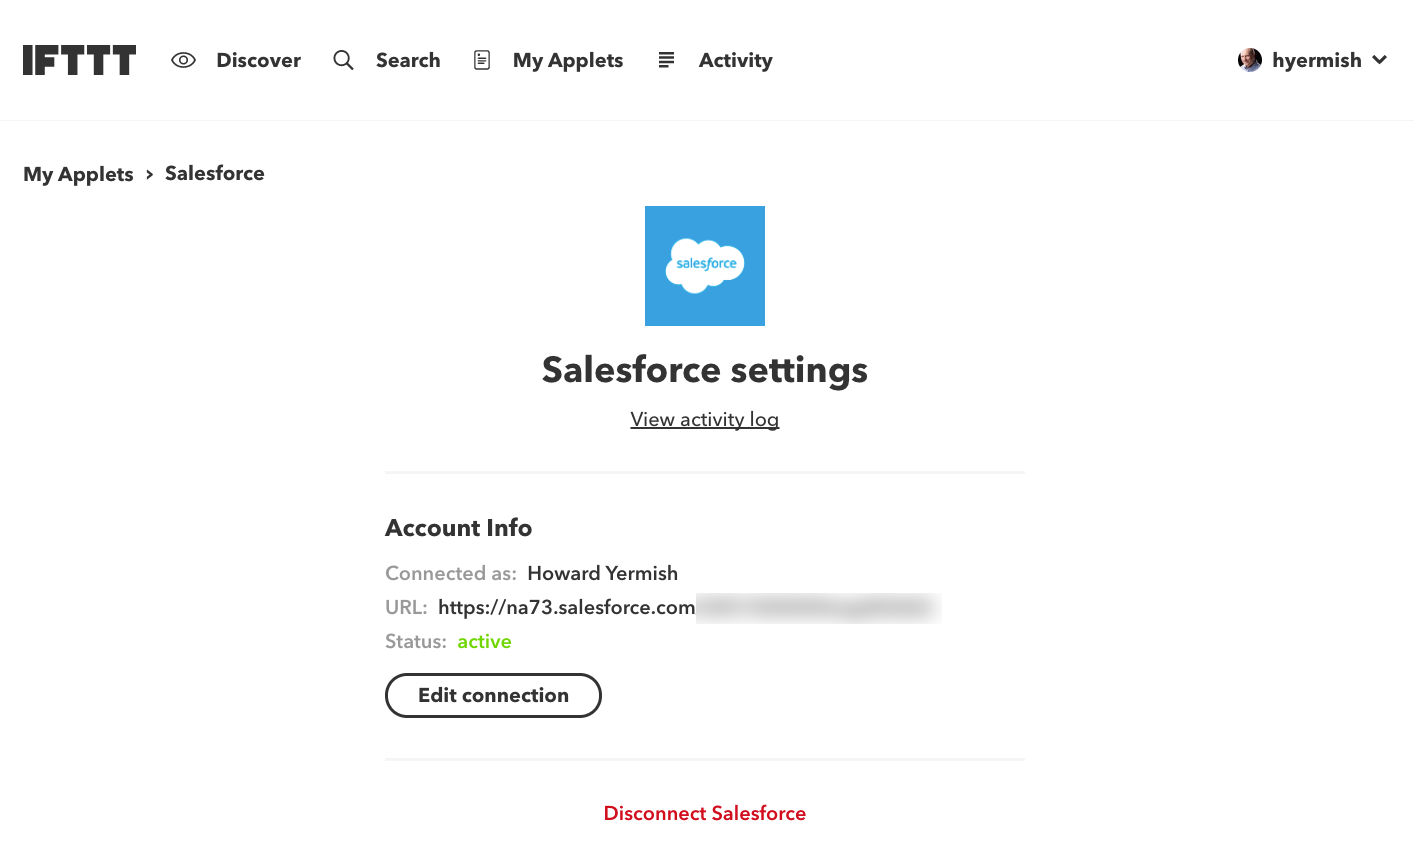 Check the Salesforce settings in IFTTT